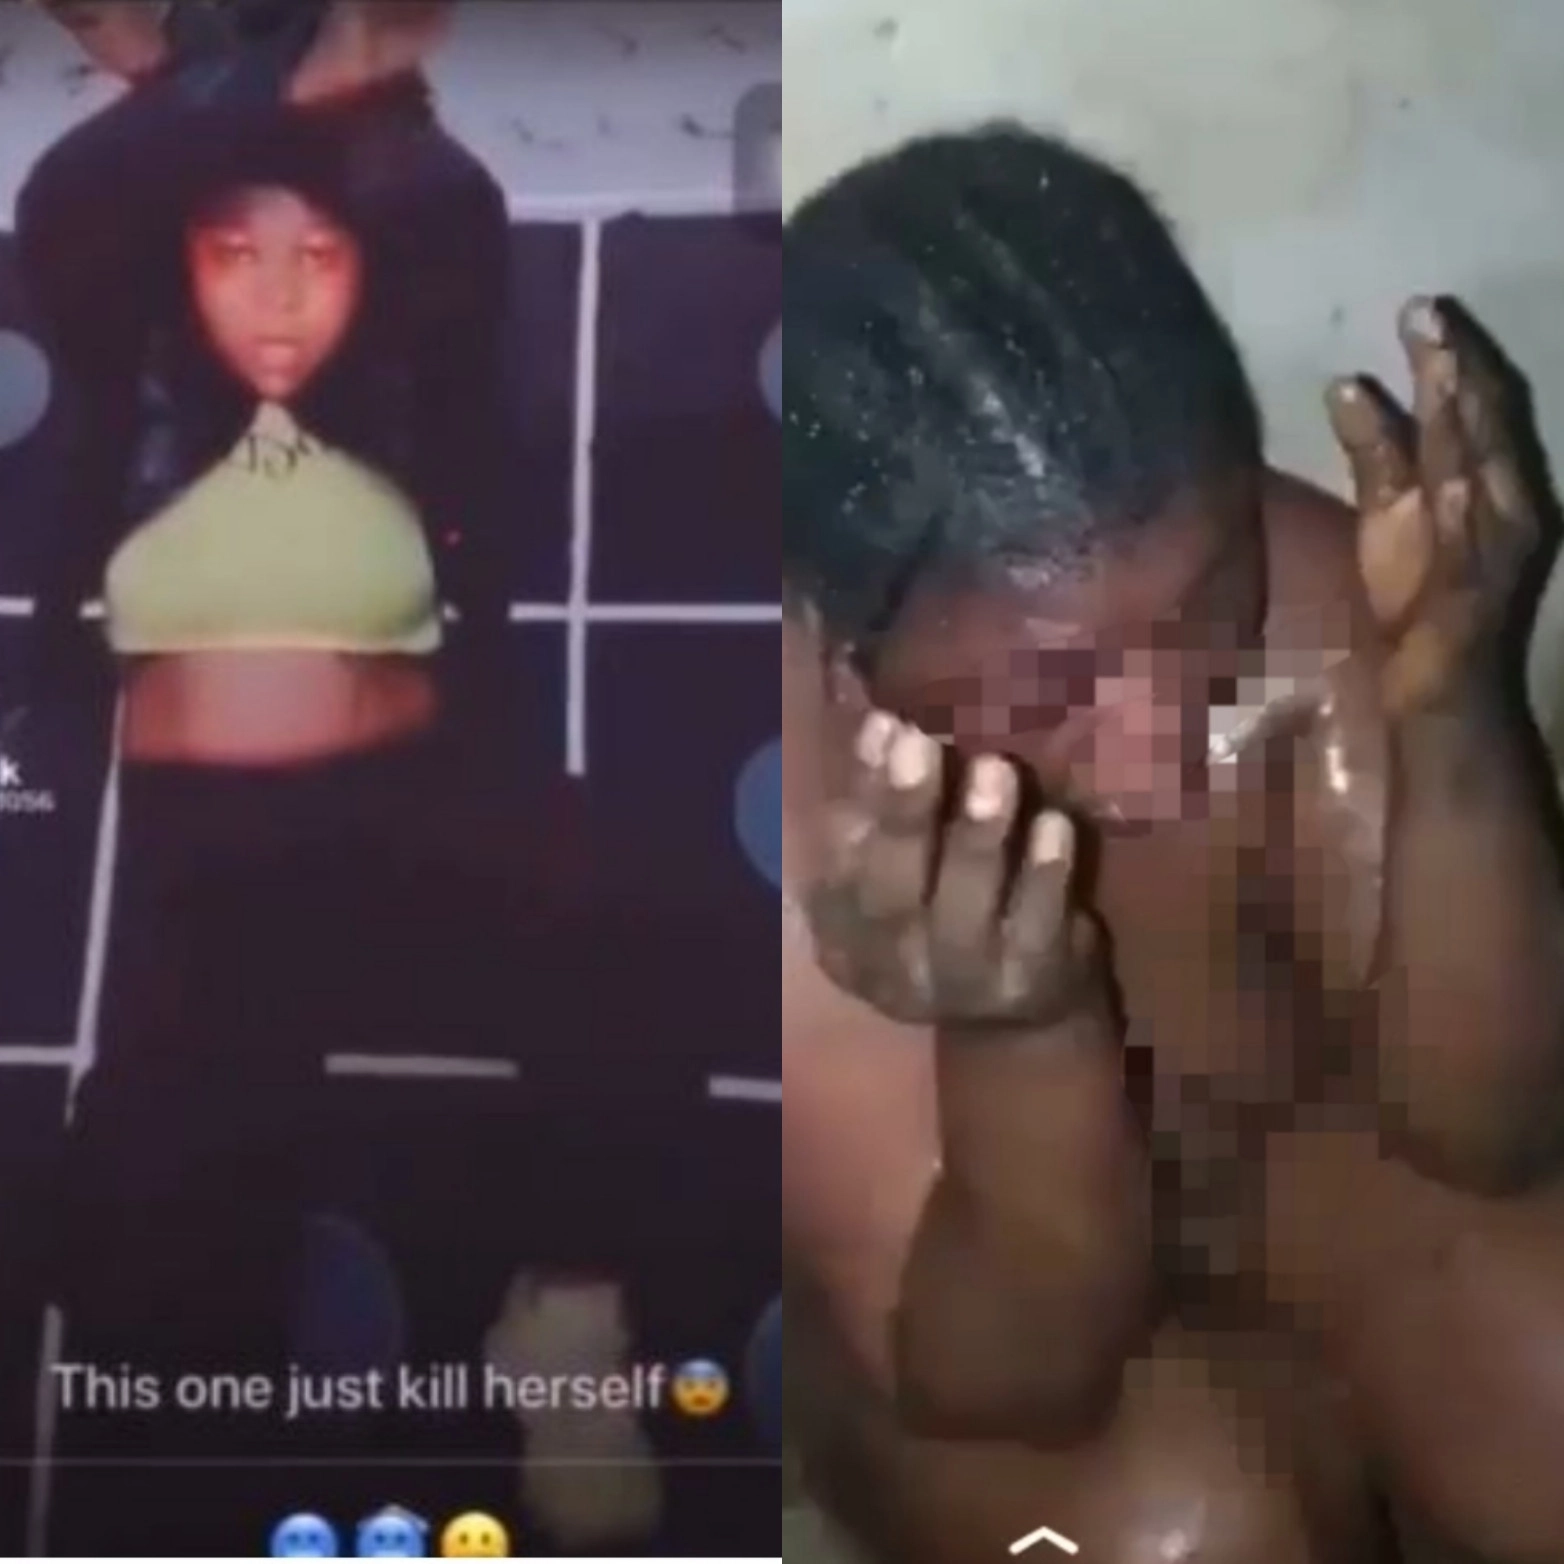 Suspected Cultist Arrested After Brutalizing Lady For Using Cult Audio in TikTok Video